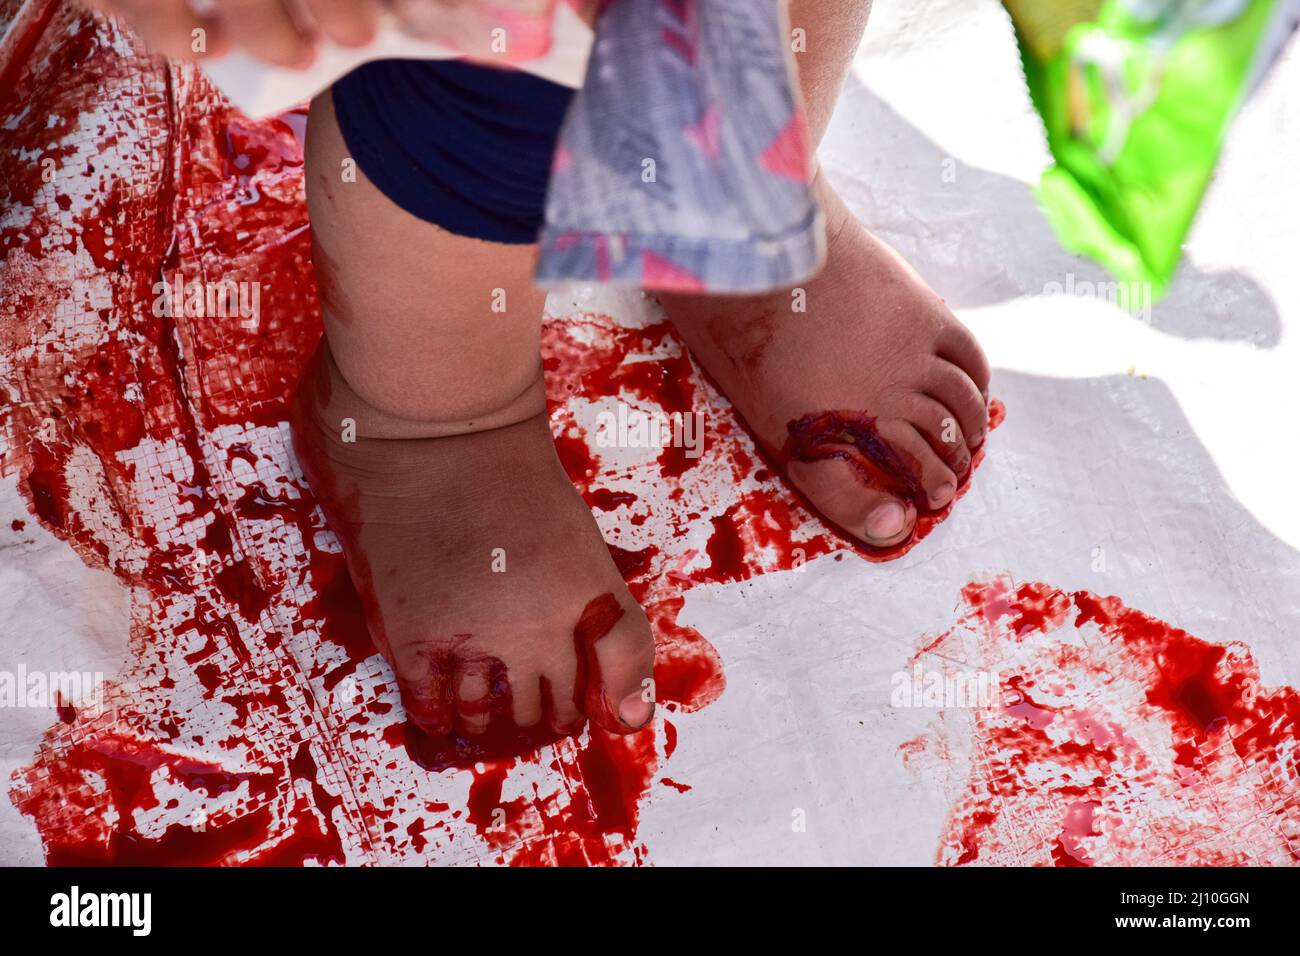 A young patient bleeds after receiving leech therapy on her feet. Every year traditional health workers in Kashmir use leeches to treat people for small, itchy, painful lumps that develop on the skin called chilblains, acquired during the winter on Nowruz (the Iranian New Year), which marks the first day of spring and the beginning of the year in the Persian calendar. (Photo by Saqib Majeed / SOPA Images/Sipa USA) Stock Photo